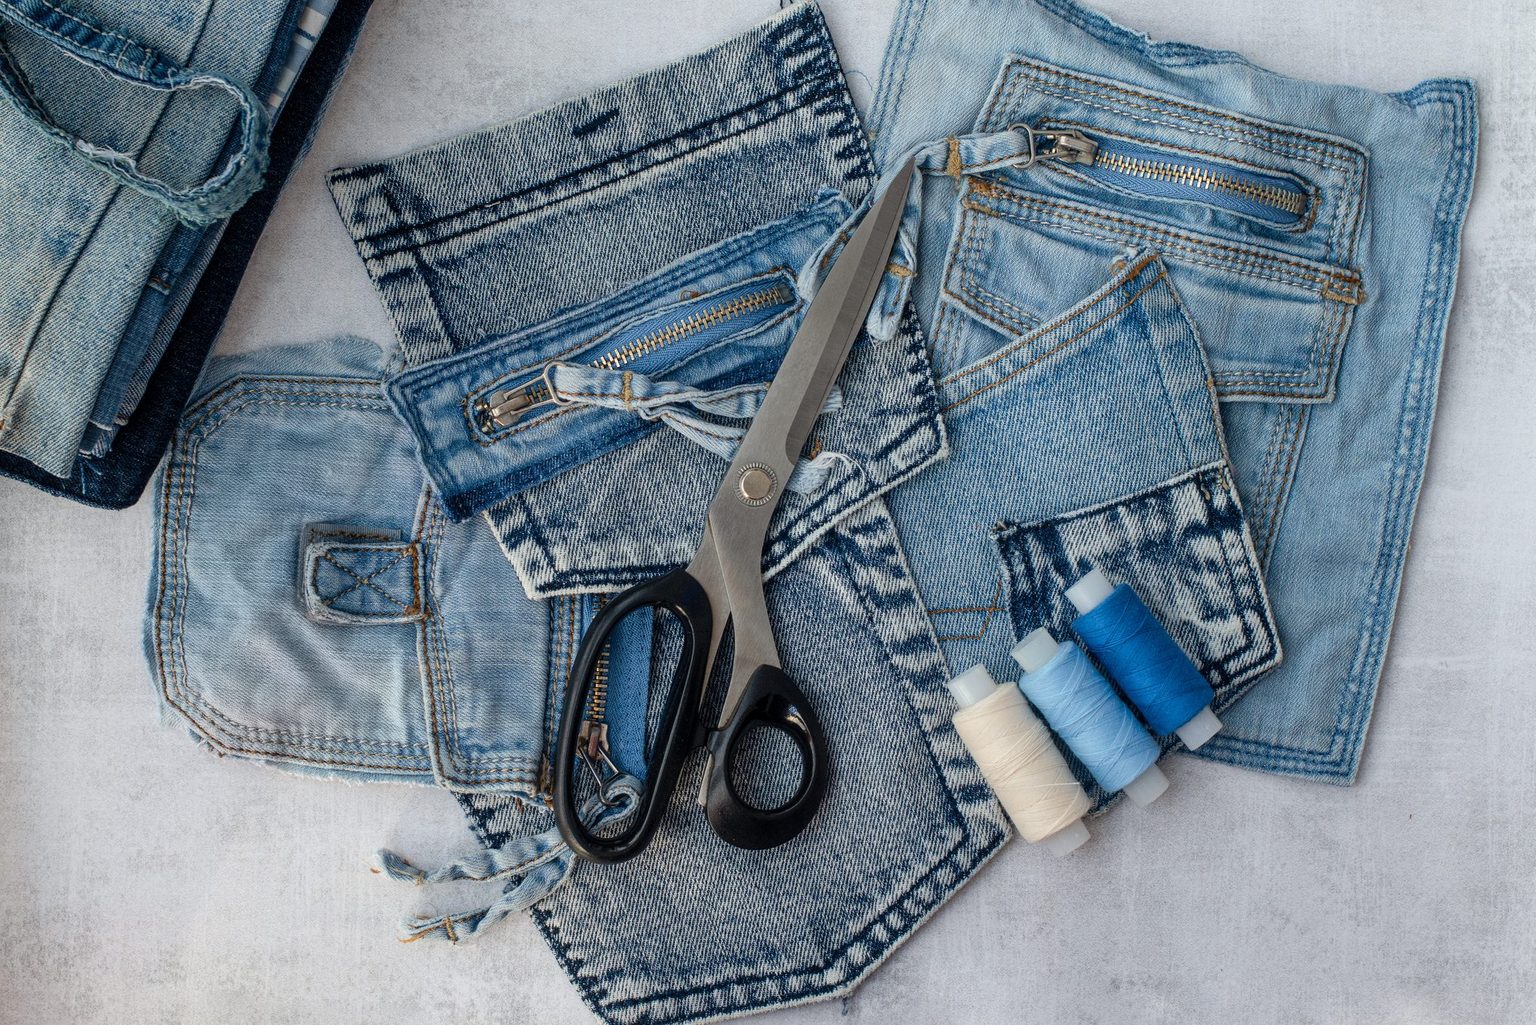 10 Ways to Upcycle Clothes — How to Upcycle Old Jeans, Tees and More ...